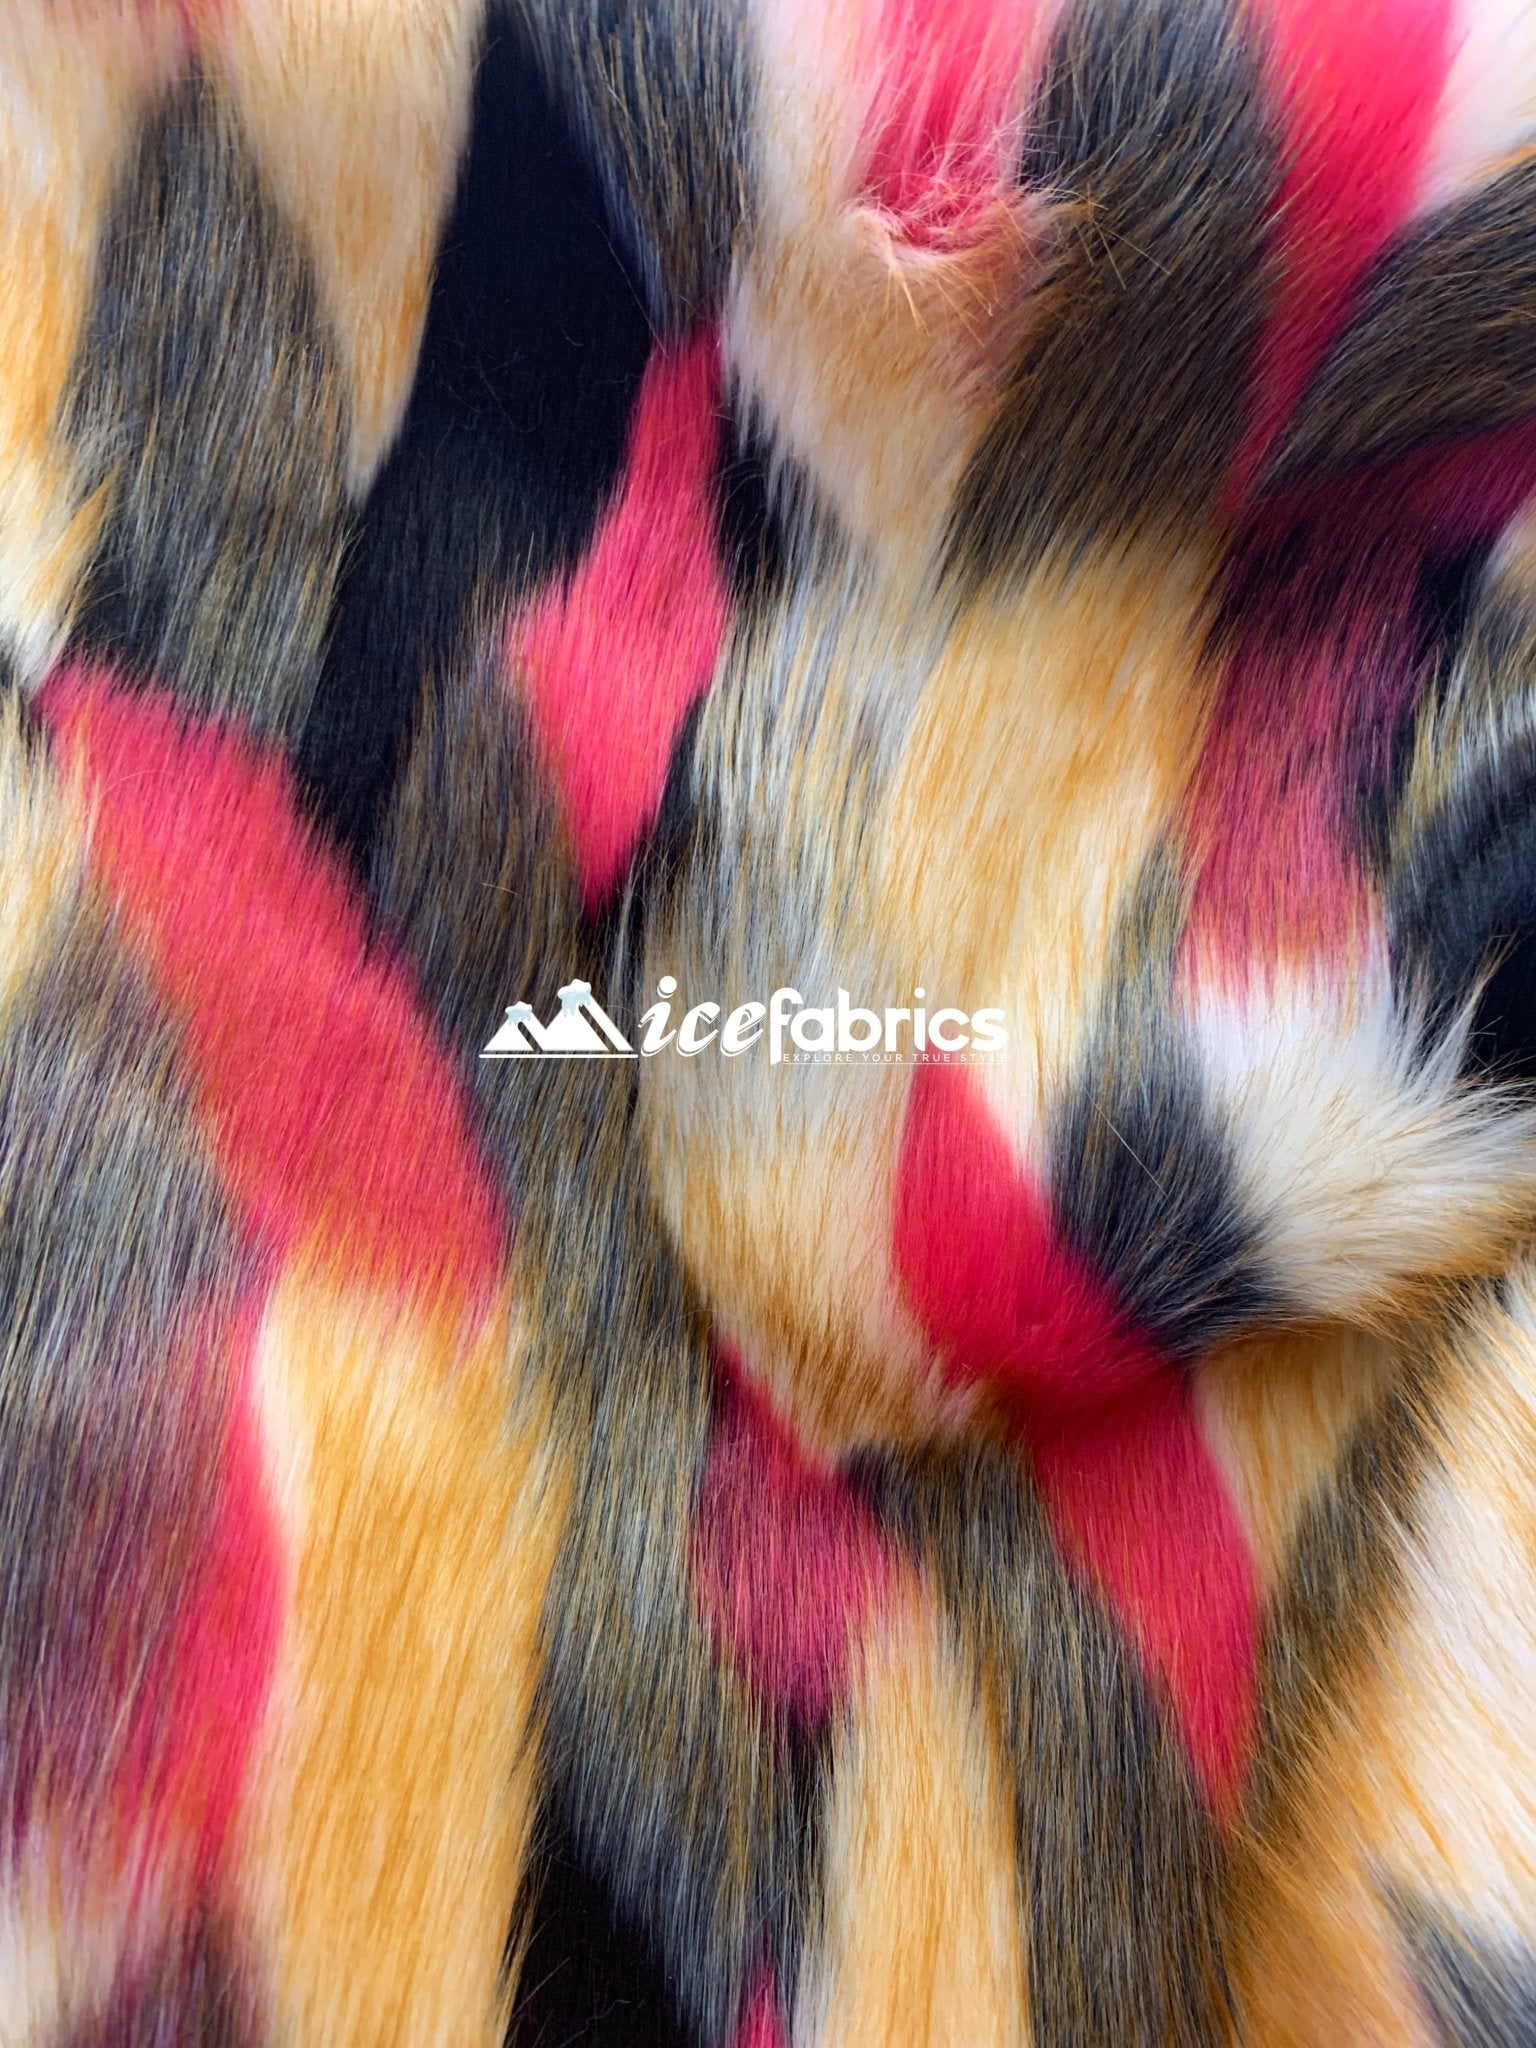 Multi-Color Animal Fake Faux Fur Fabric By The YardICEFABRICICE FABRICSBlack Brown Coral GrayBy The Yard (60 inches Wide)Multi-Color Animal Fake Faux Fur Fabric By The Yard ICEFABRIC Black Brown Coral Gray